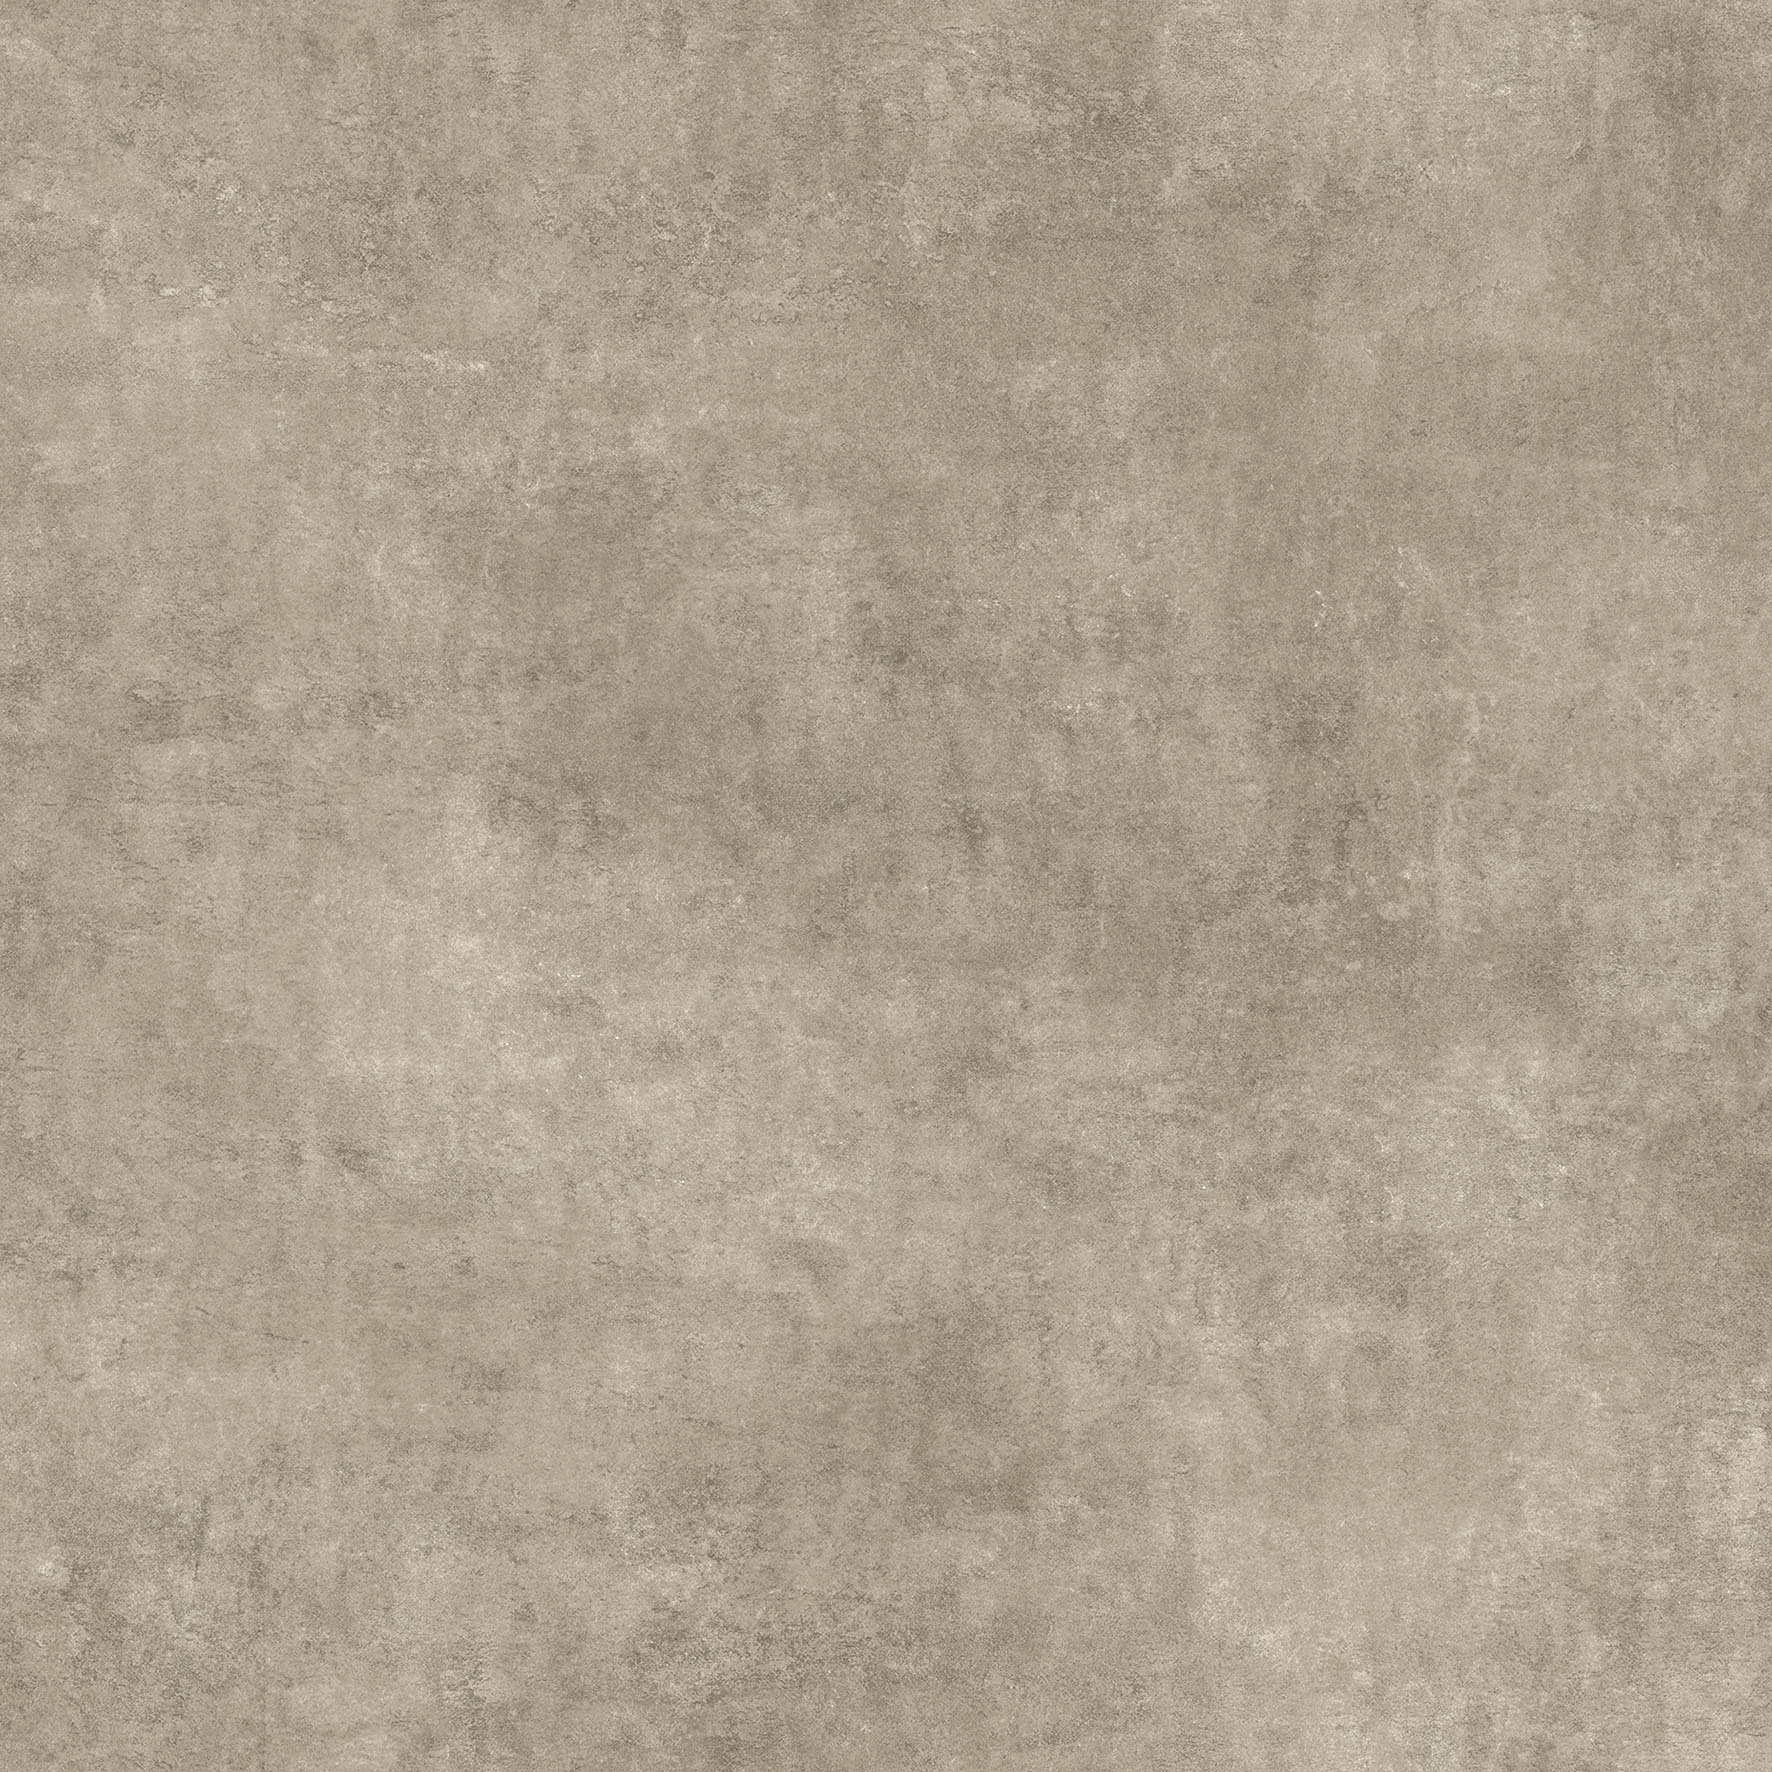 AT.ALPHA TAUPE 60x60